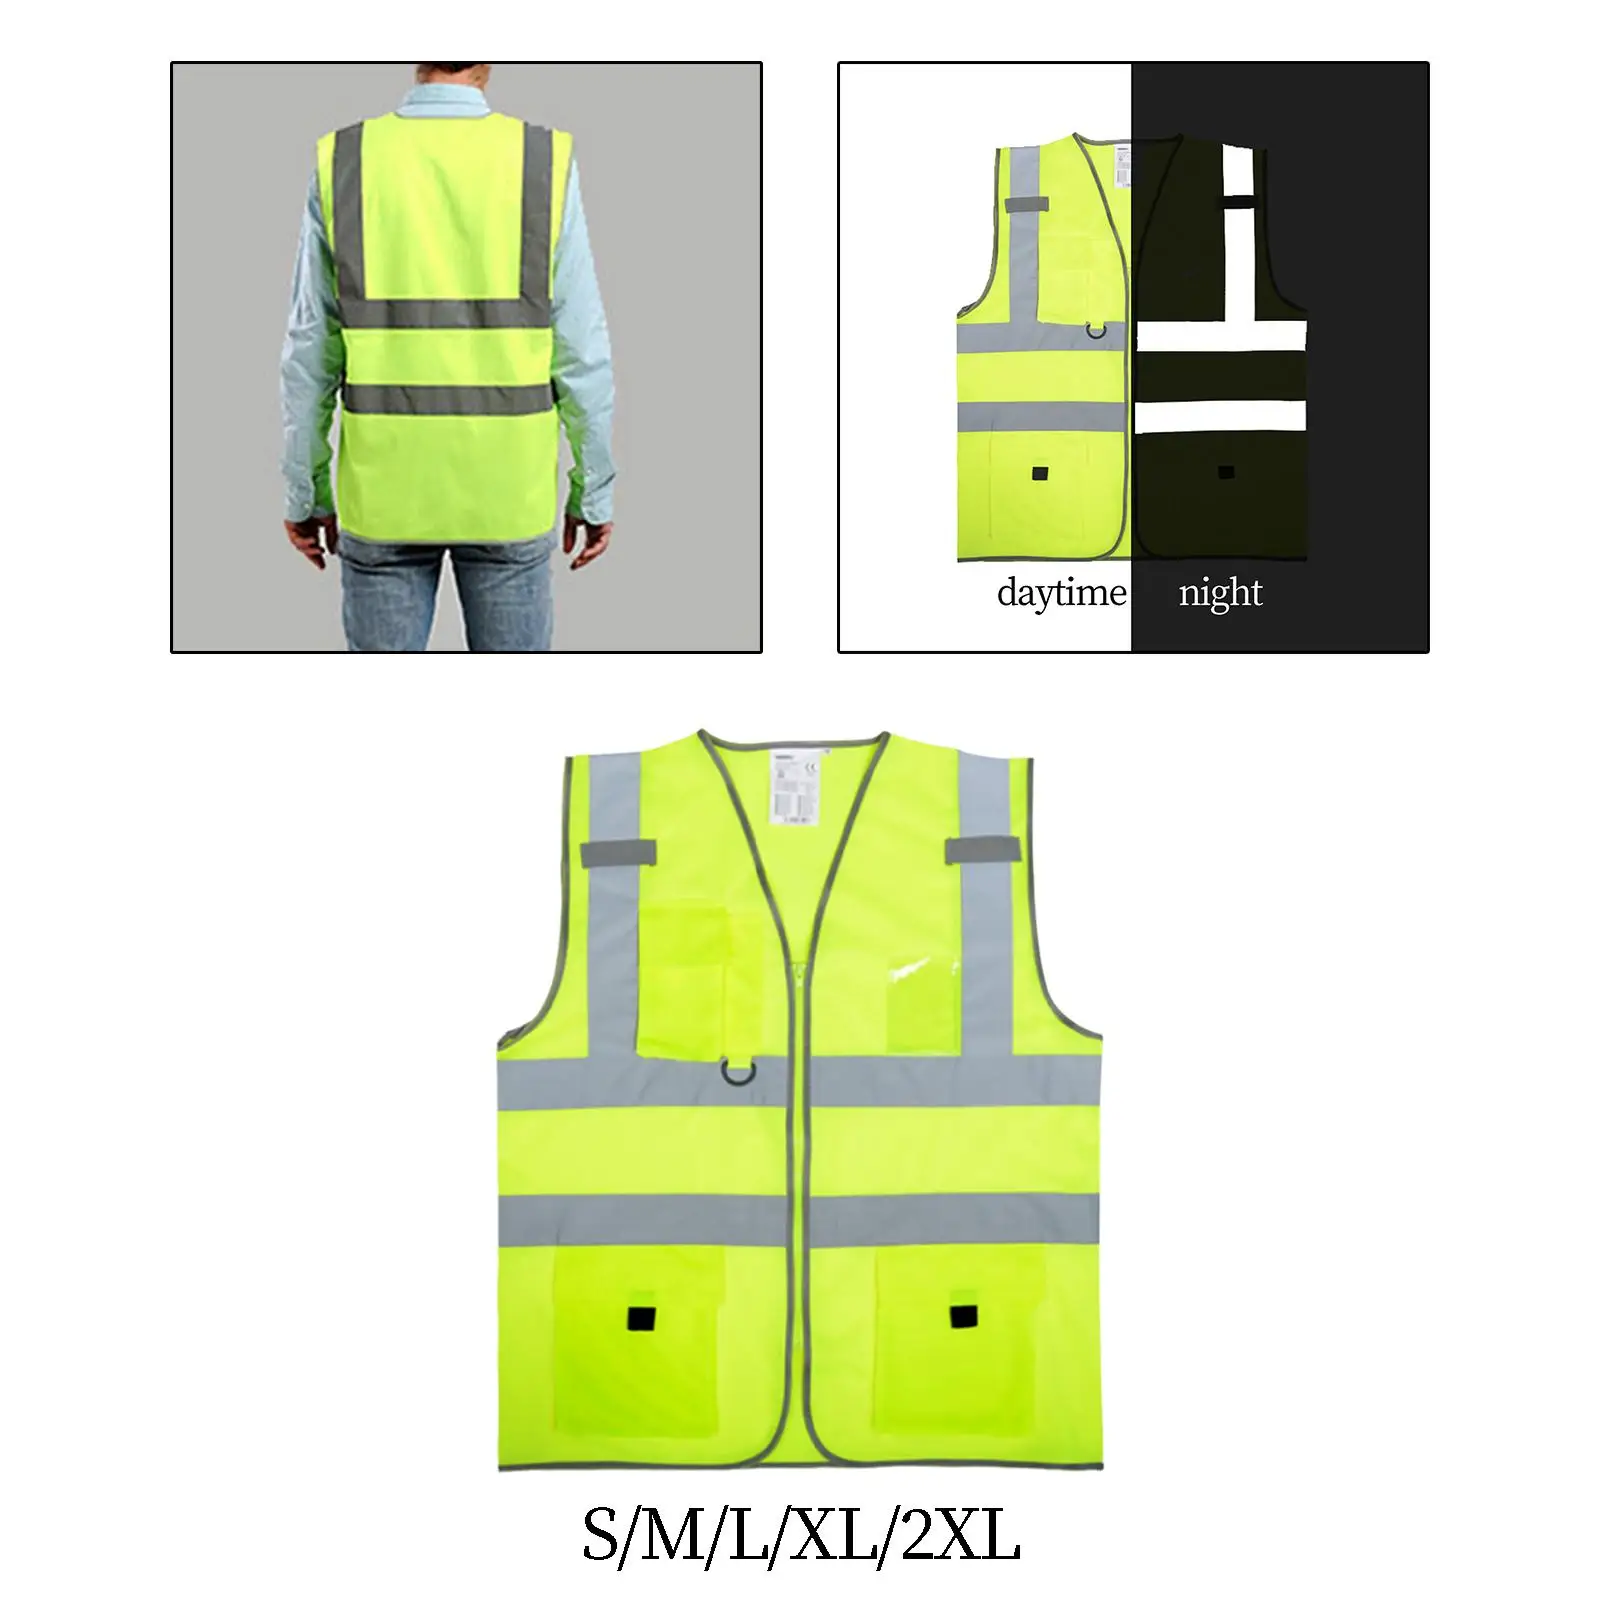 Reflective Vest Women Highlight Safety Work Vest Construction Gear for Traffic Engineering Workers Airport Racing Running Sports